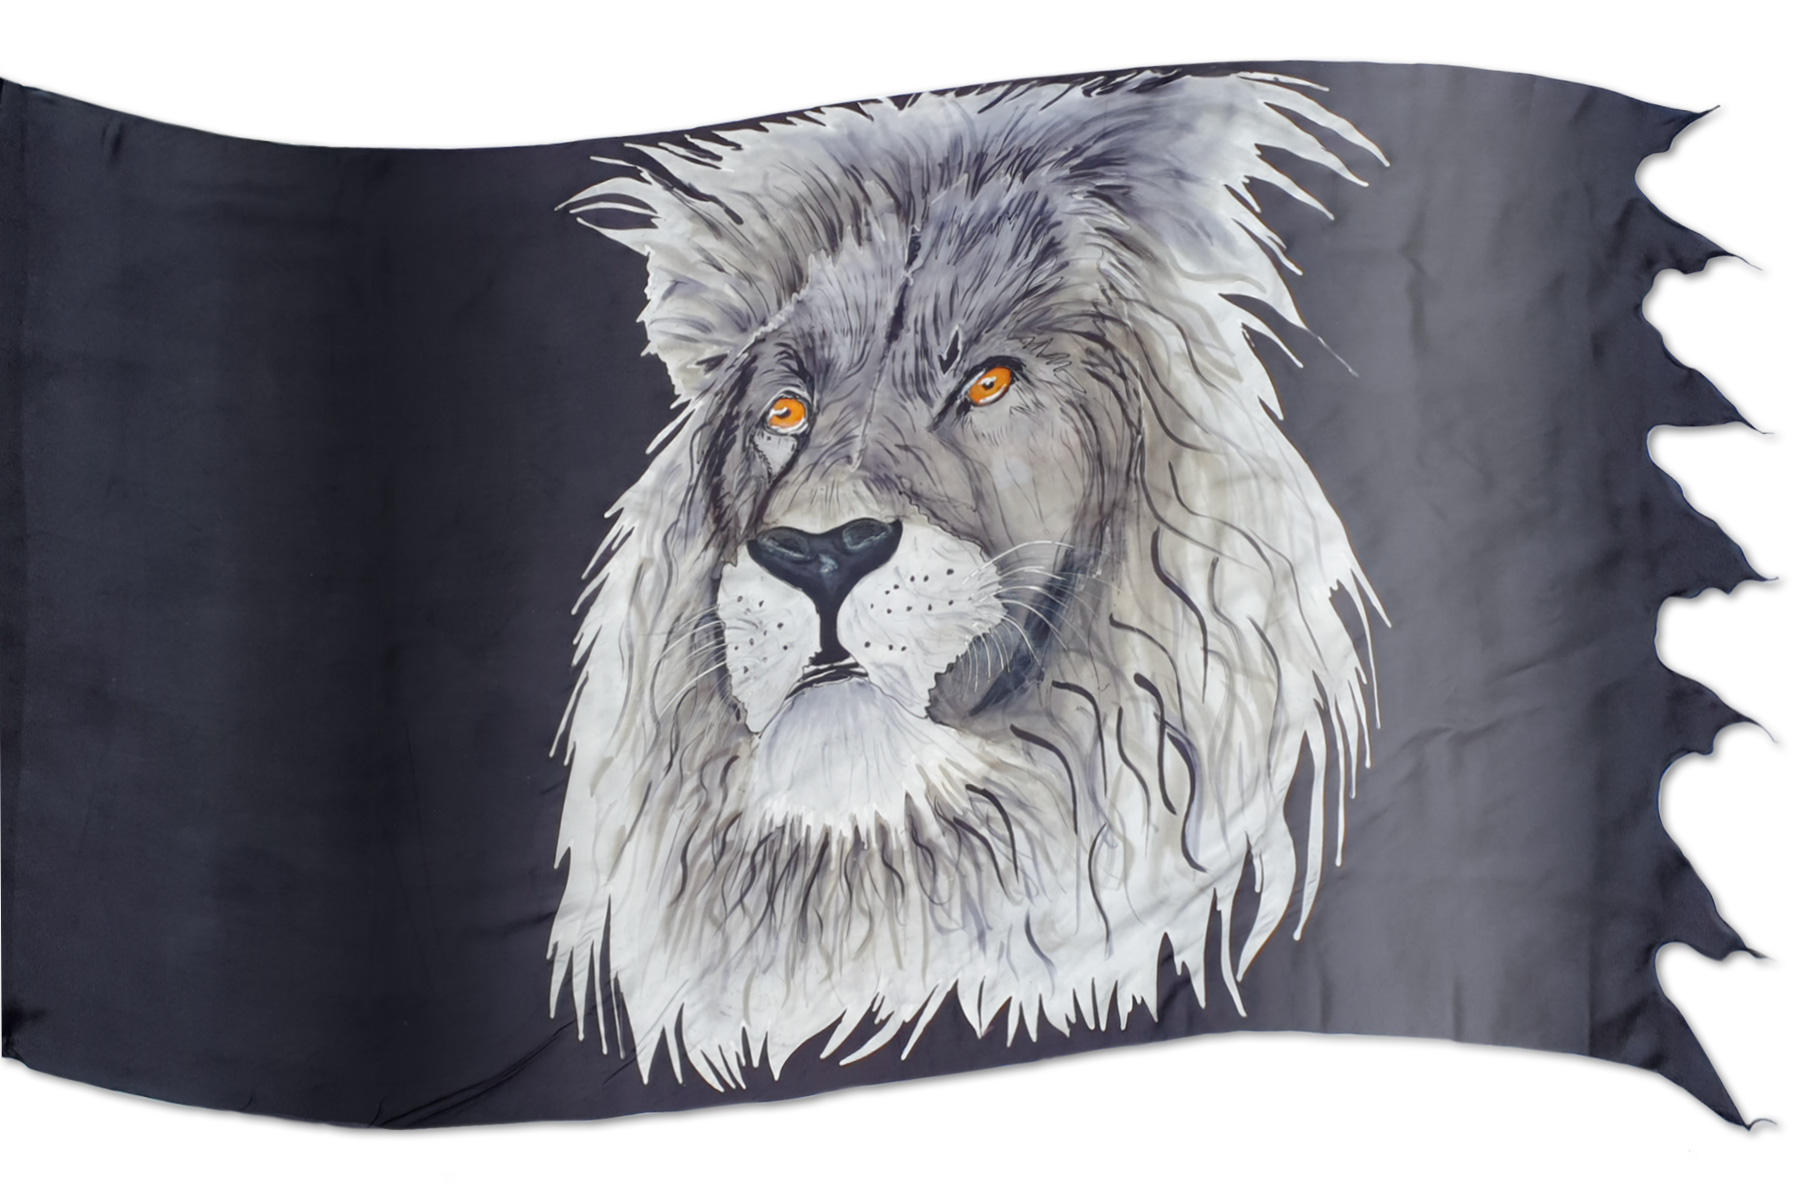 The design ‘Lion of Judah Our Defence’ in hand-crafted silk